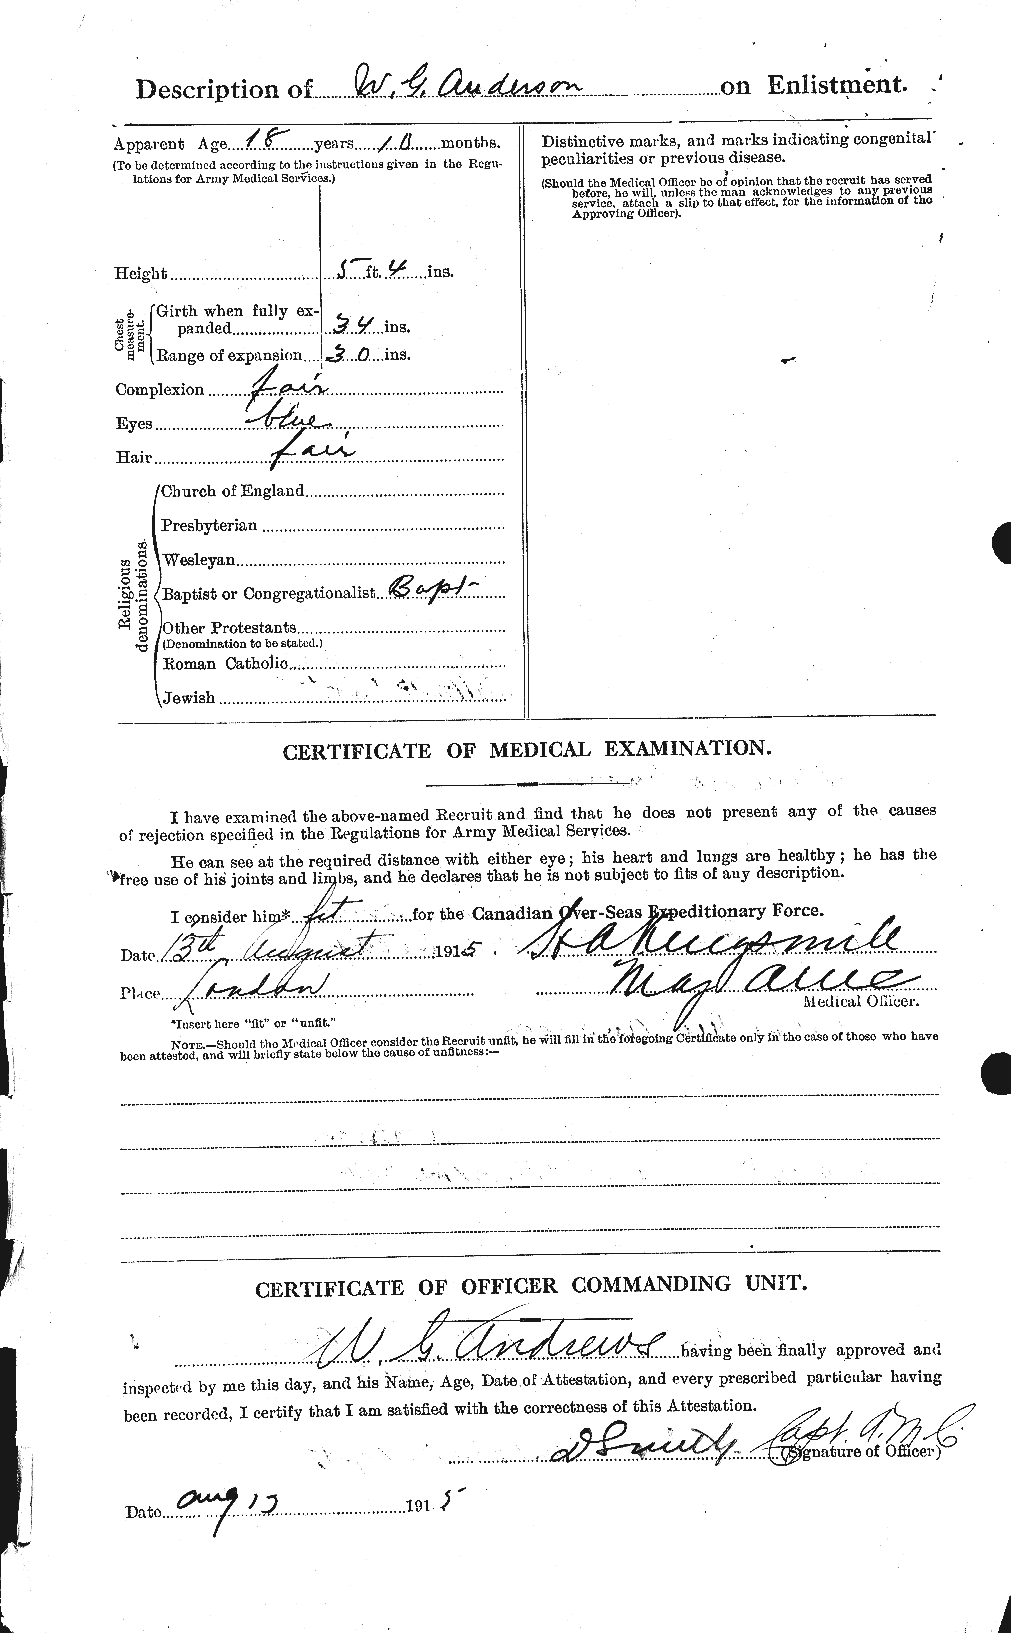 Personnel Records of the First World War - CEF 210664b